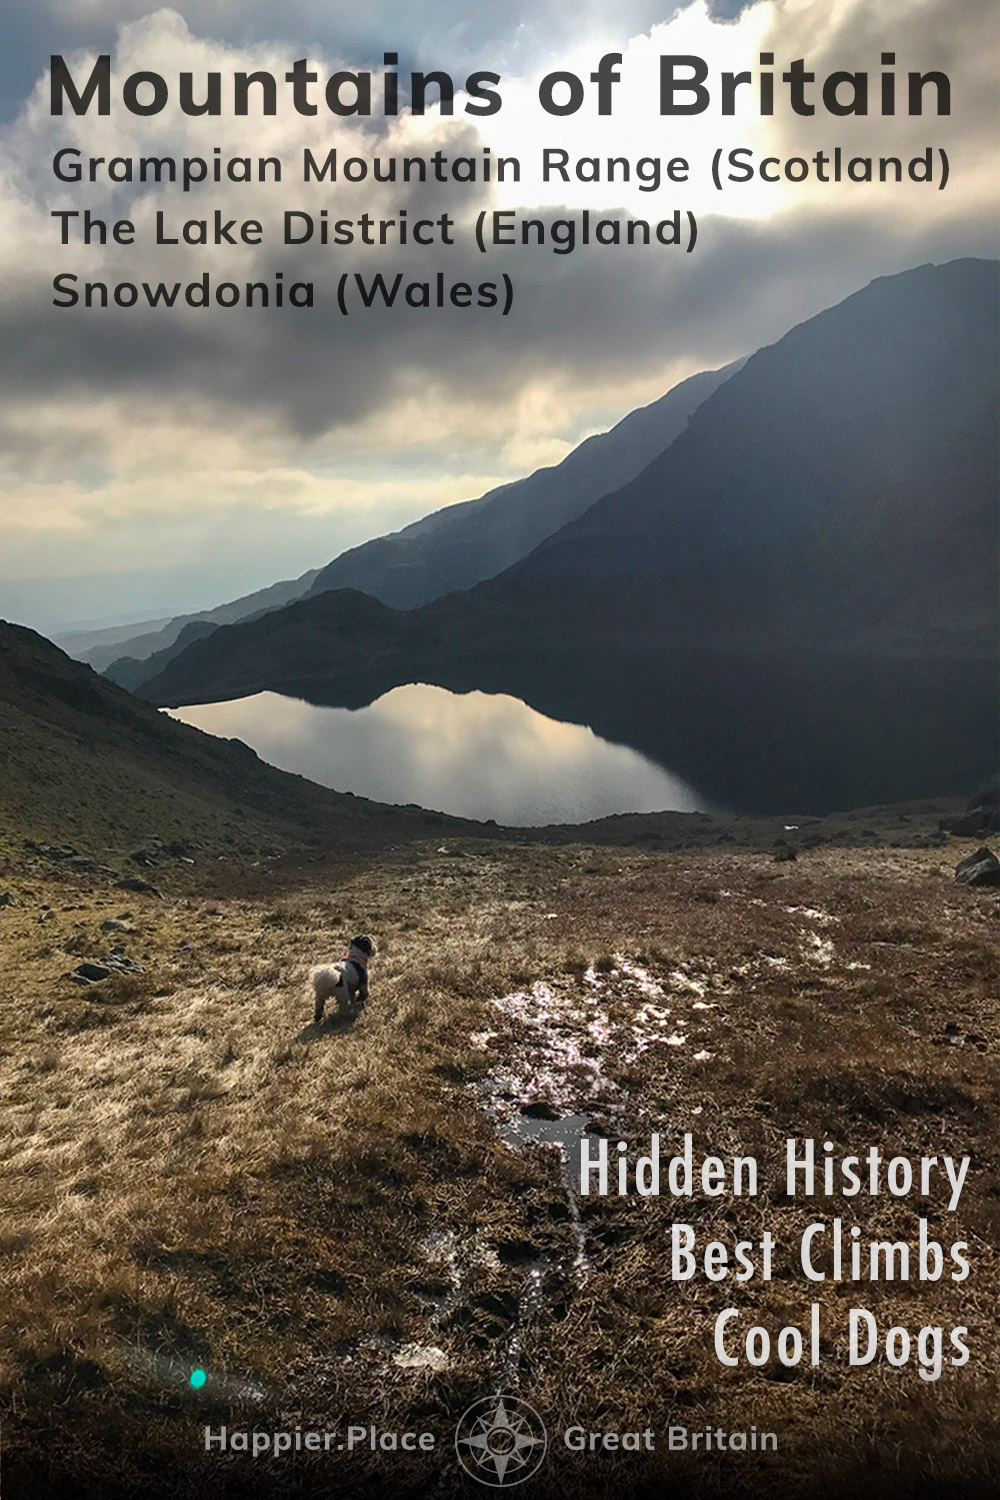 Hiking with dogs, mountain lake view, Mountains of Britain, Hidden History and Best Climbs, Grampian Mountain Range in Scotland, The Lake District in England, Snowdonia in Wales, HappierPlace